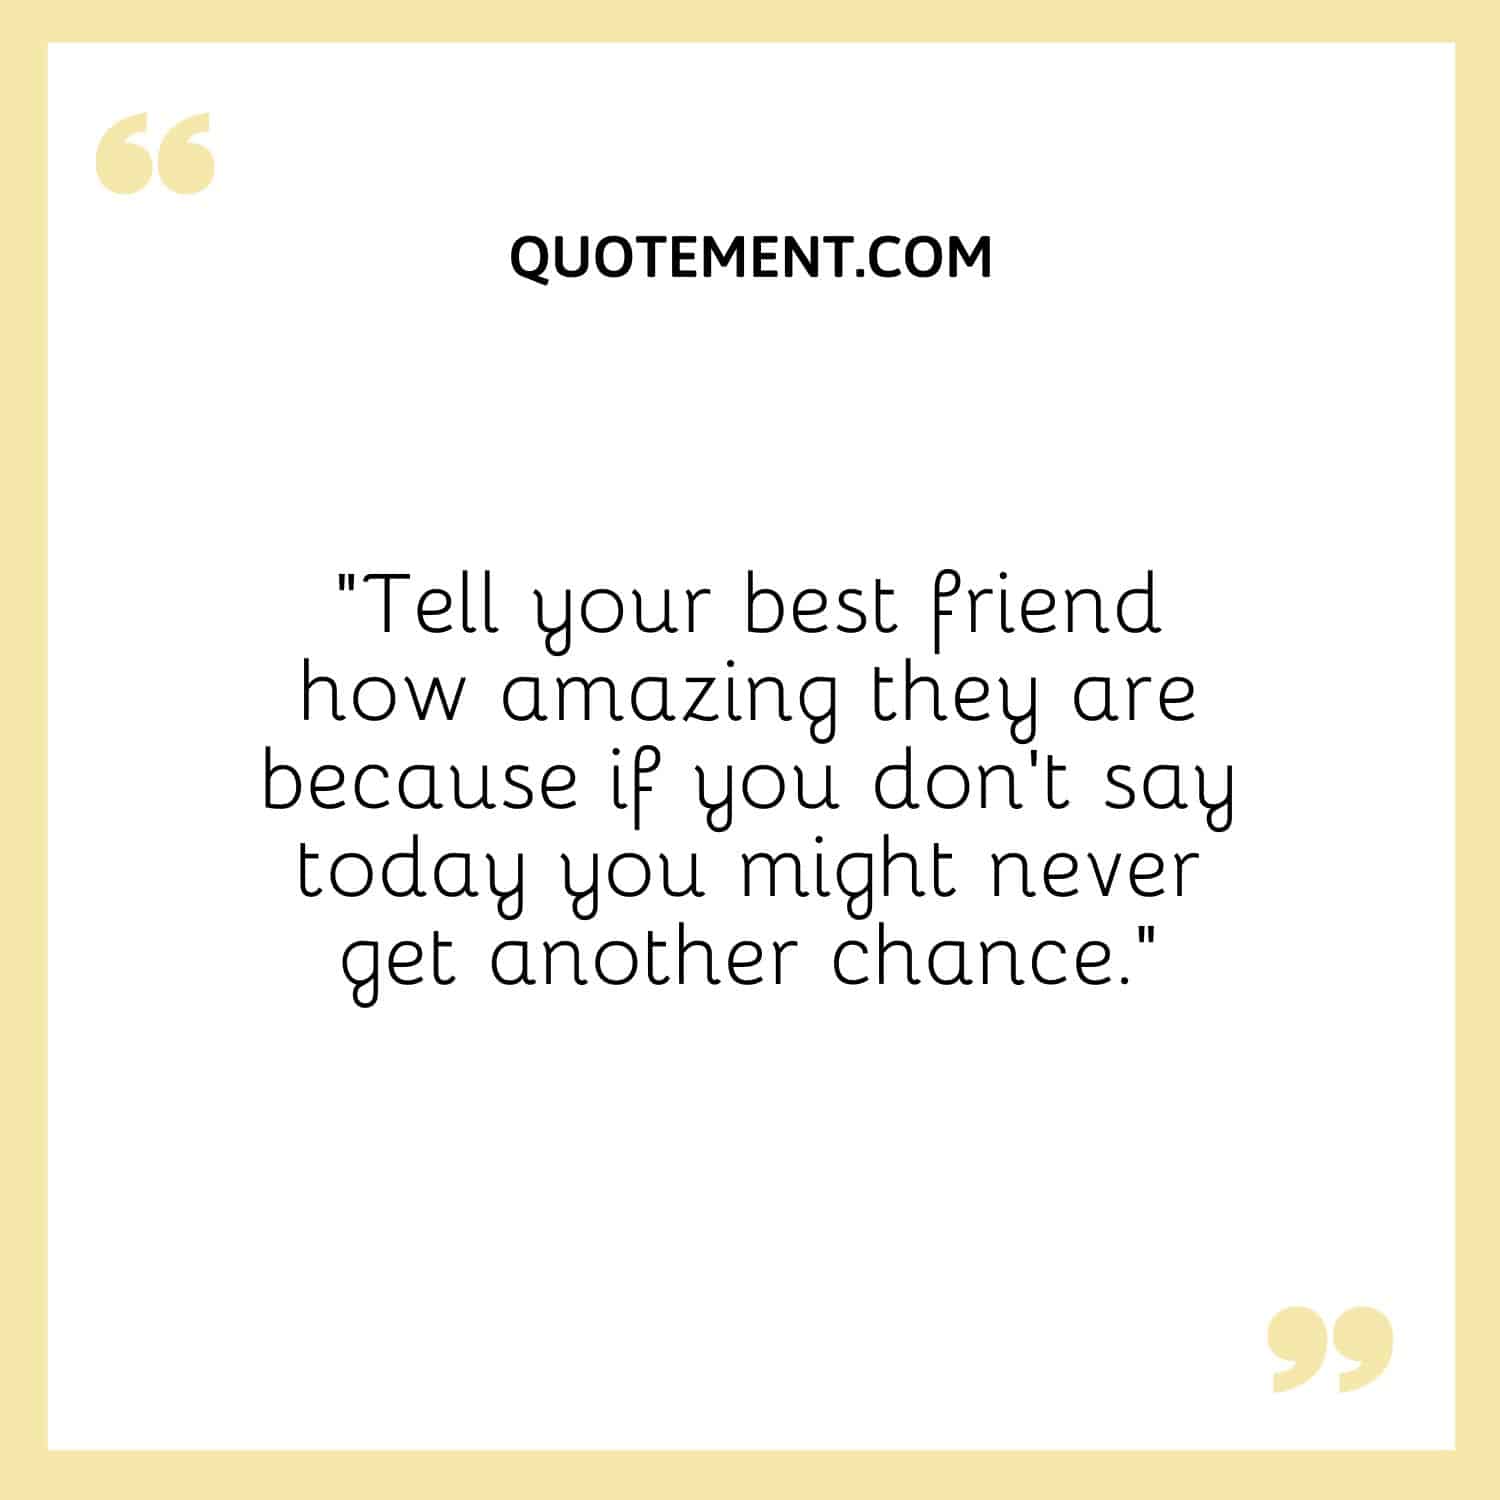 Tell your best friend how amazing they are because if you don’t say today you might never get another chance